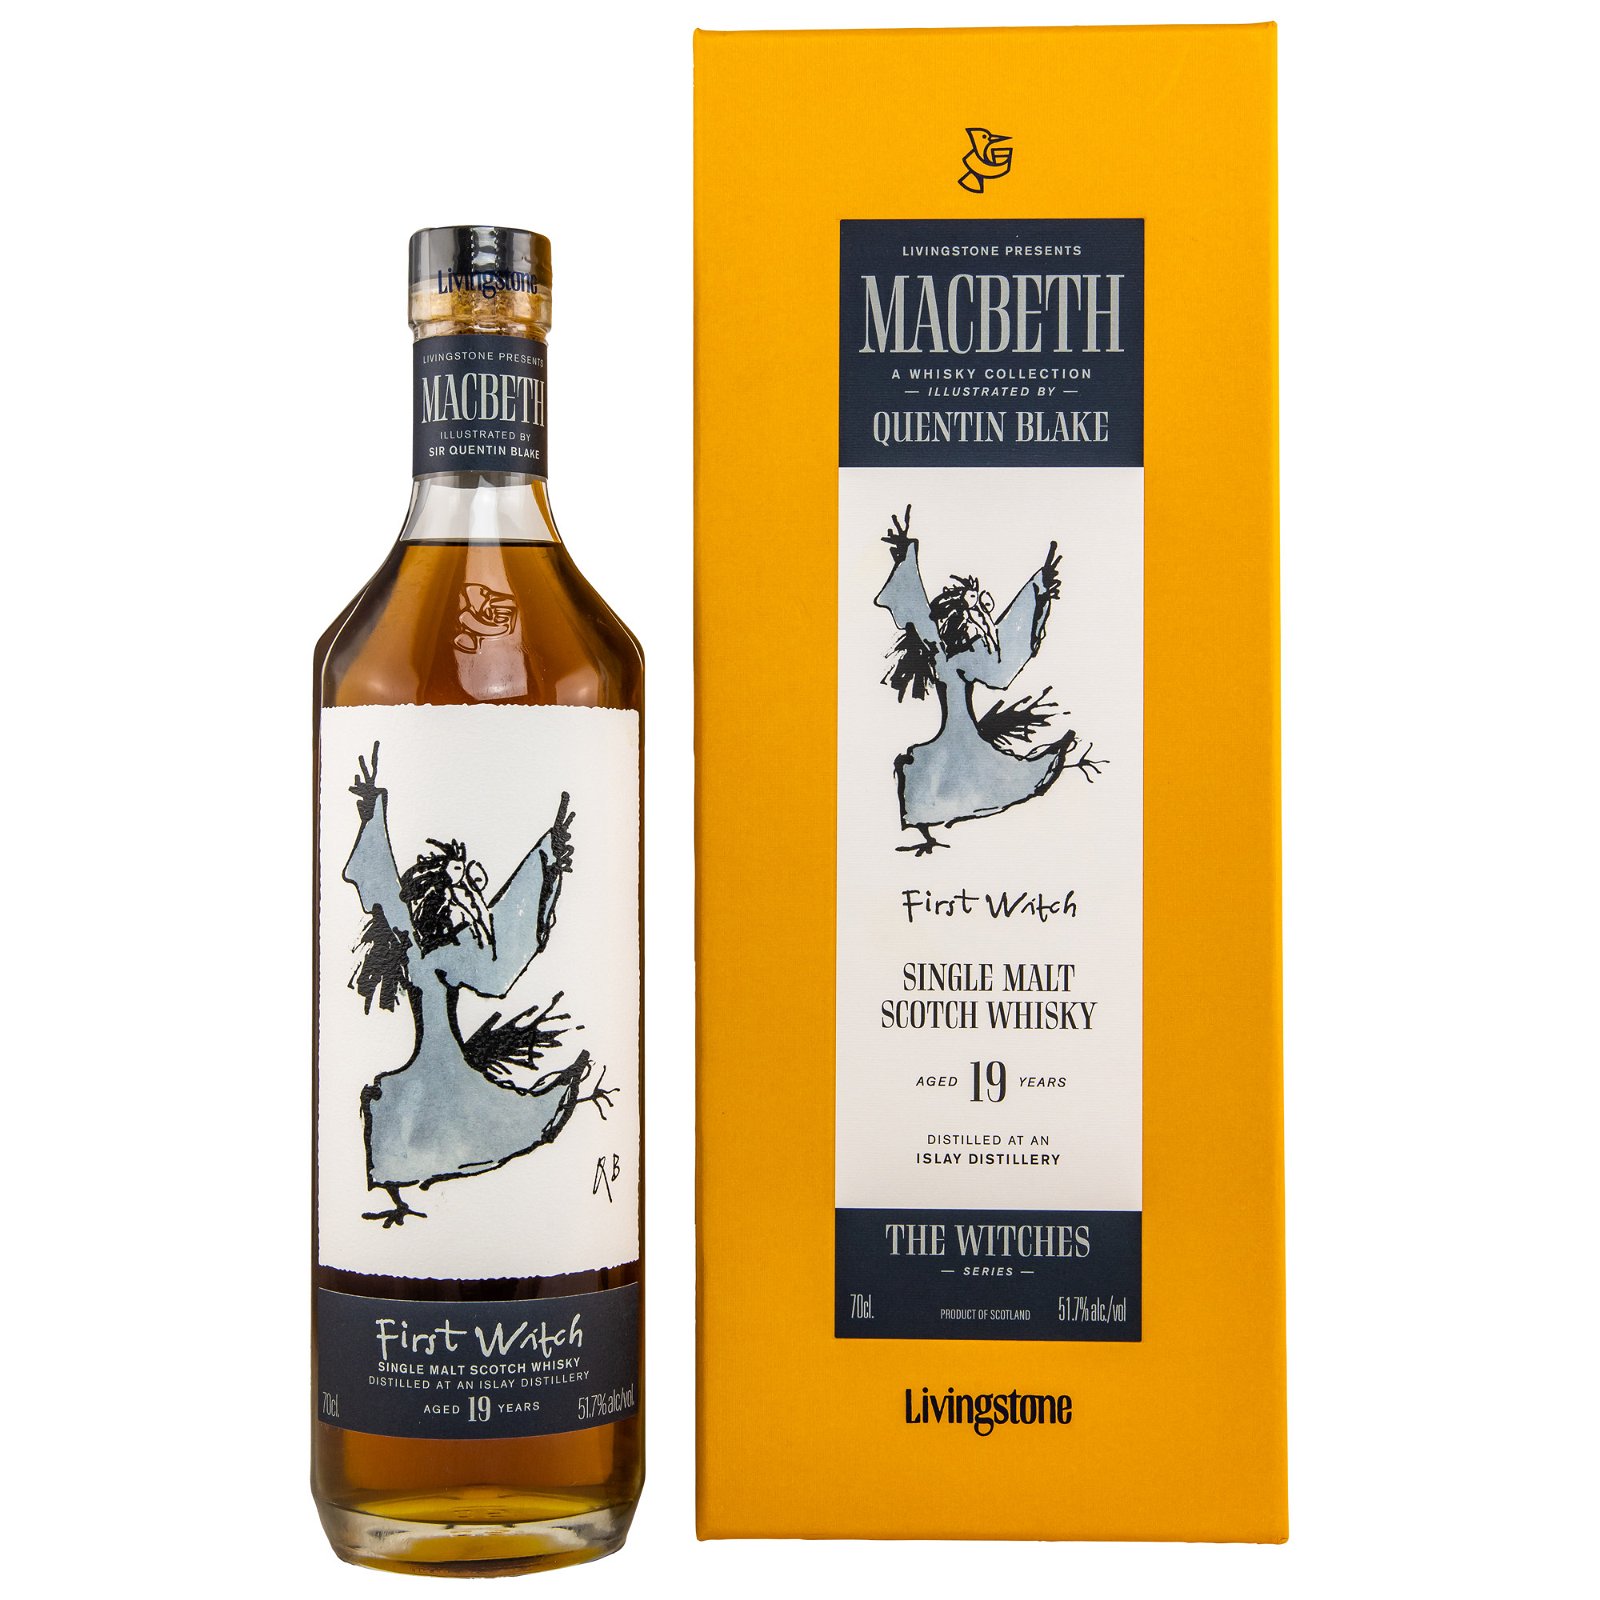 Ardbeg 19 Jahre First Witch The Witches Series The Macbeth Collection (Elixir Distillers)